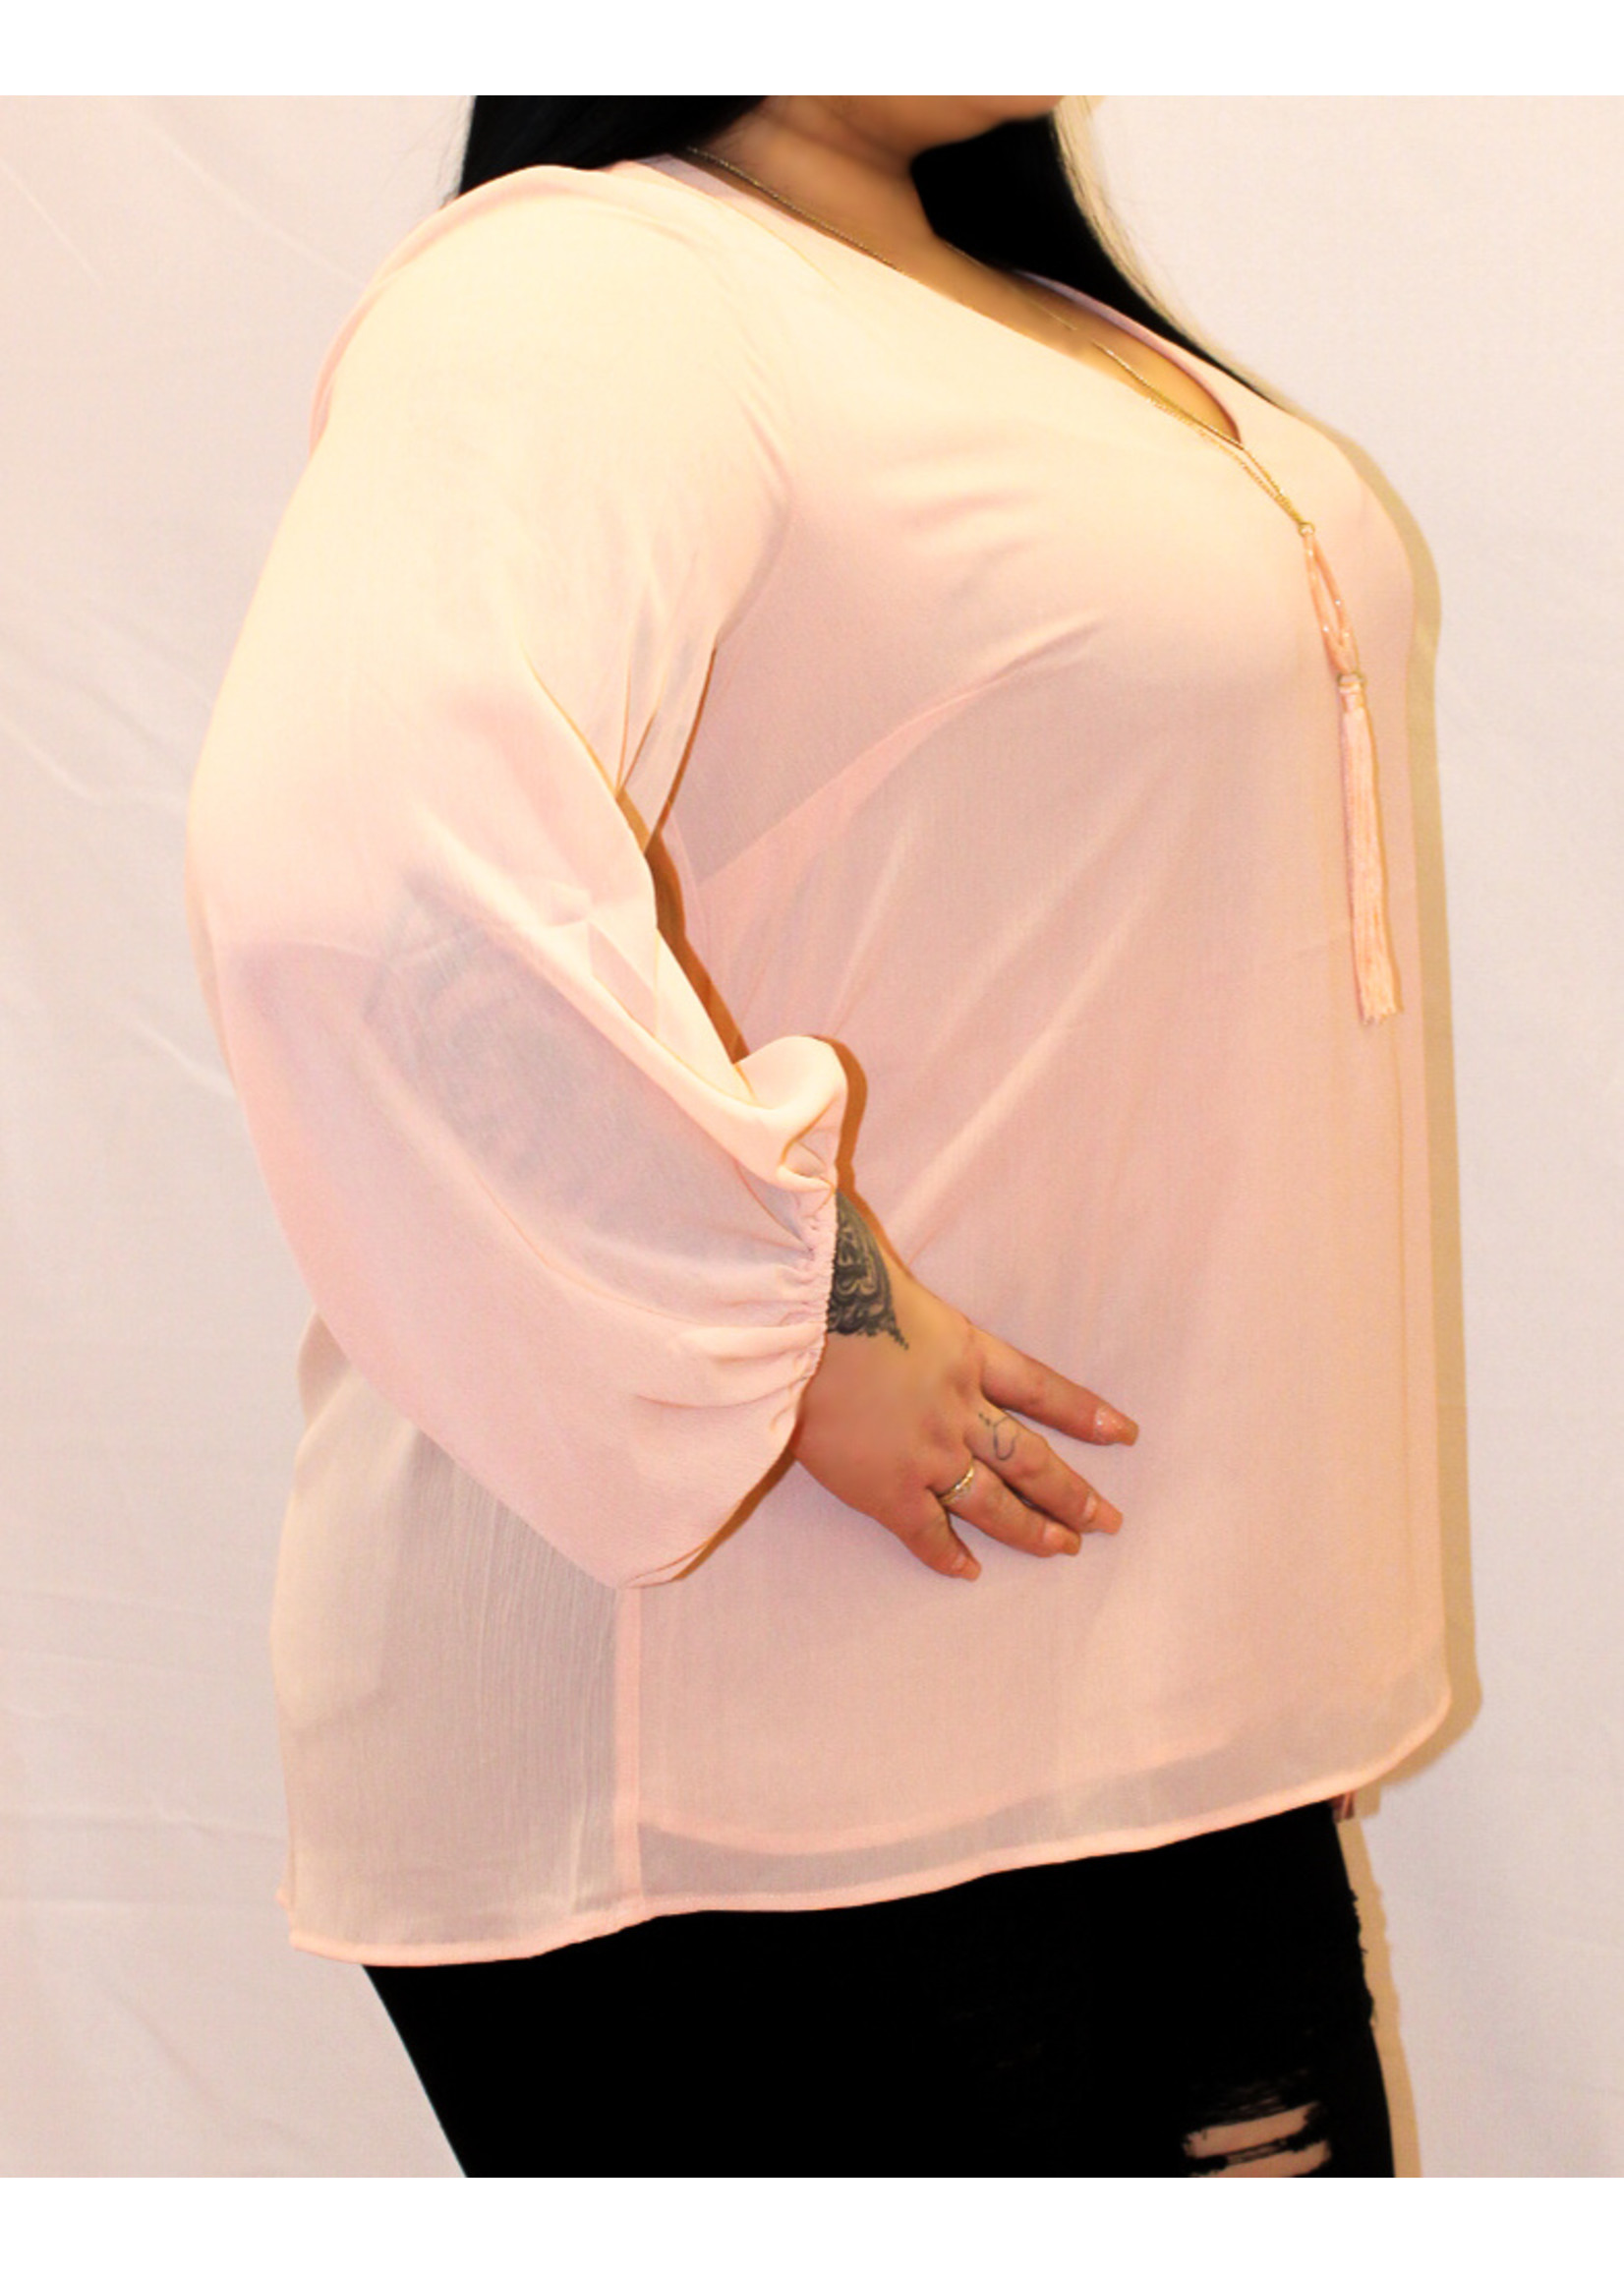 Plus size long sleeve shirt with V neck  *FINAL SALE*